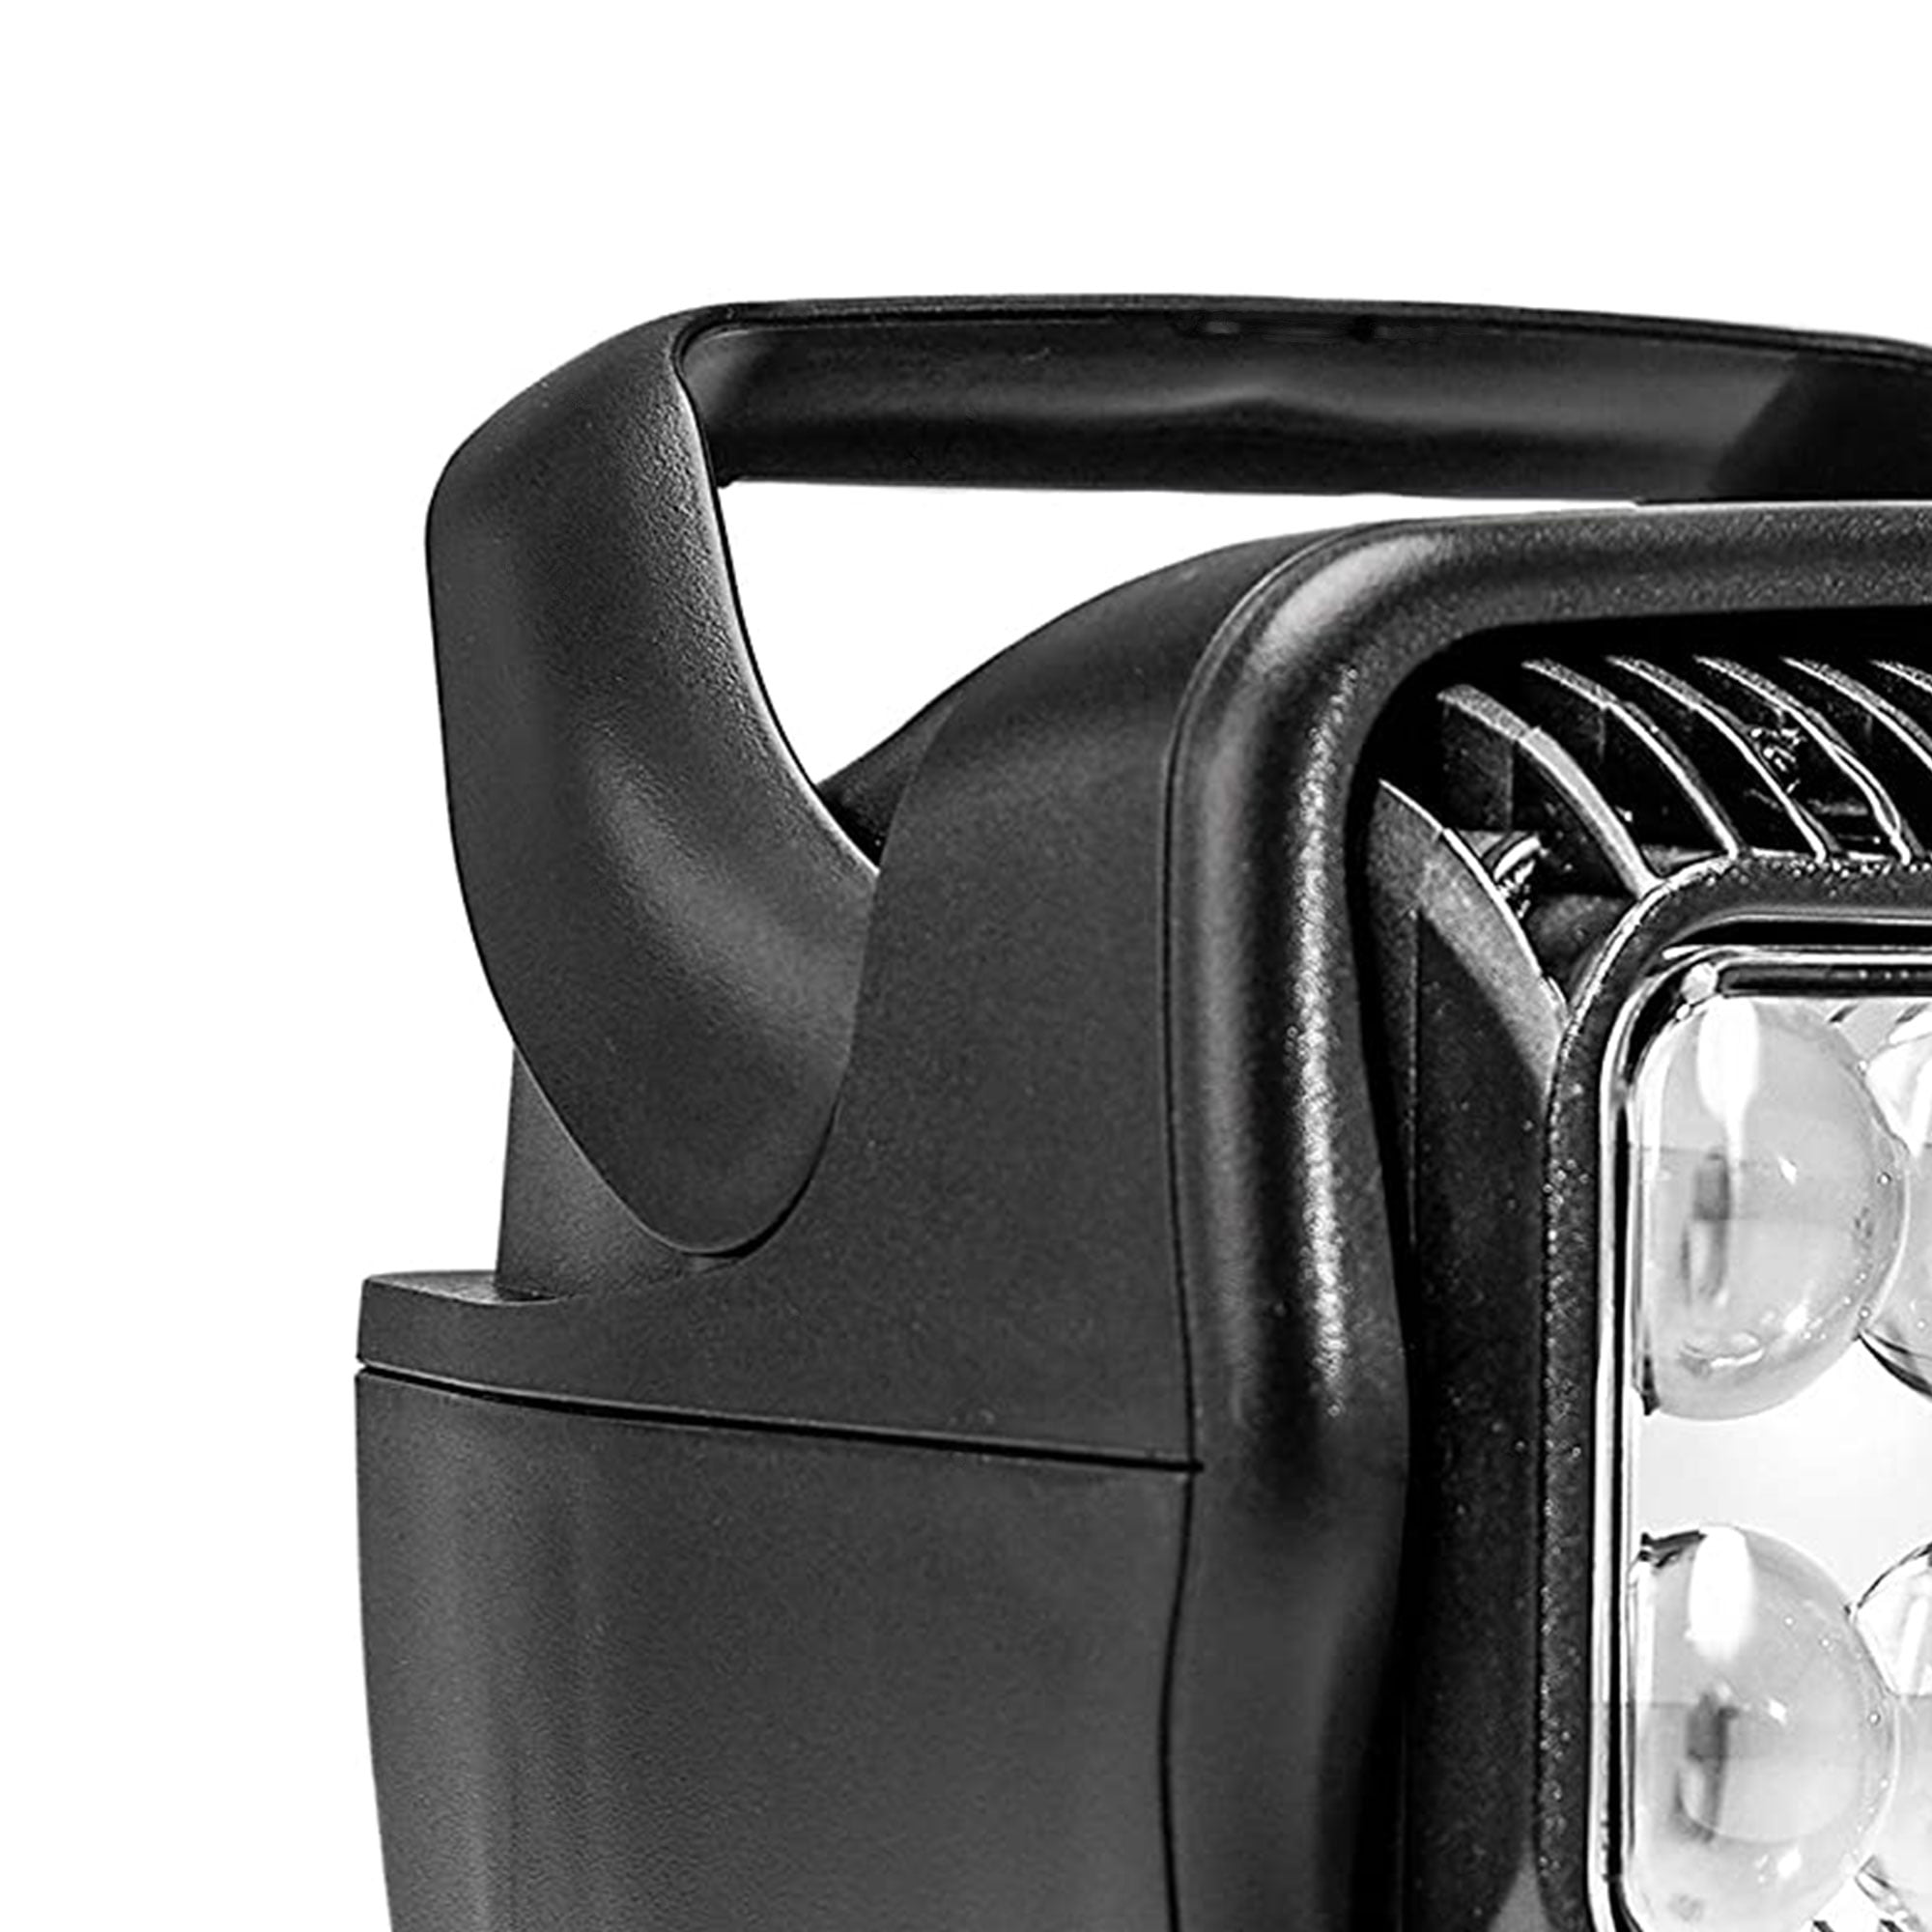  Go Light RadioRay Portable Searchlight with Magnetic Shoe,  White : Boating Spotlights : Sports & Outdoors